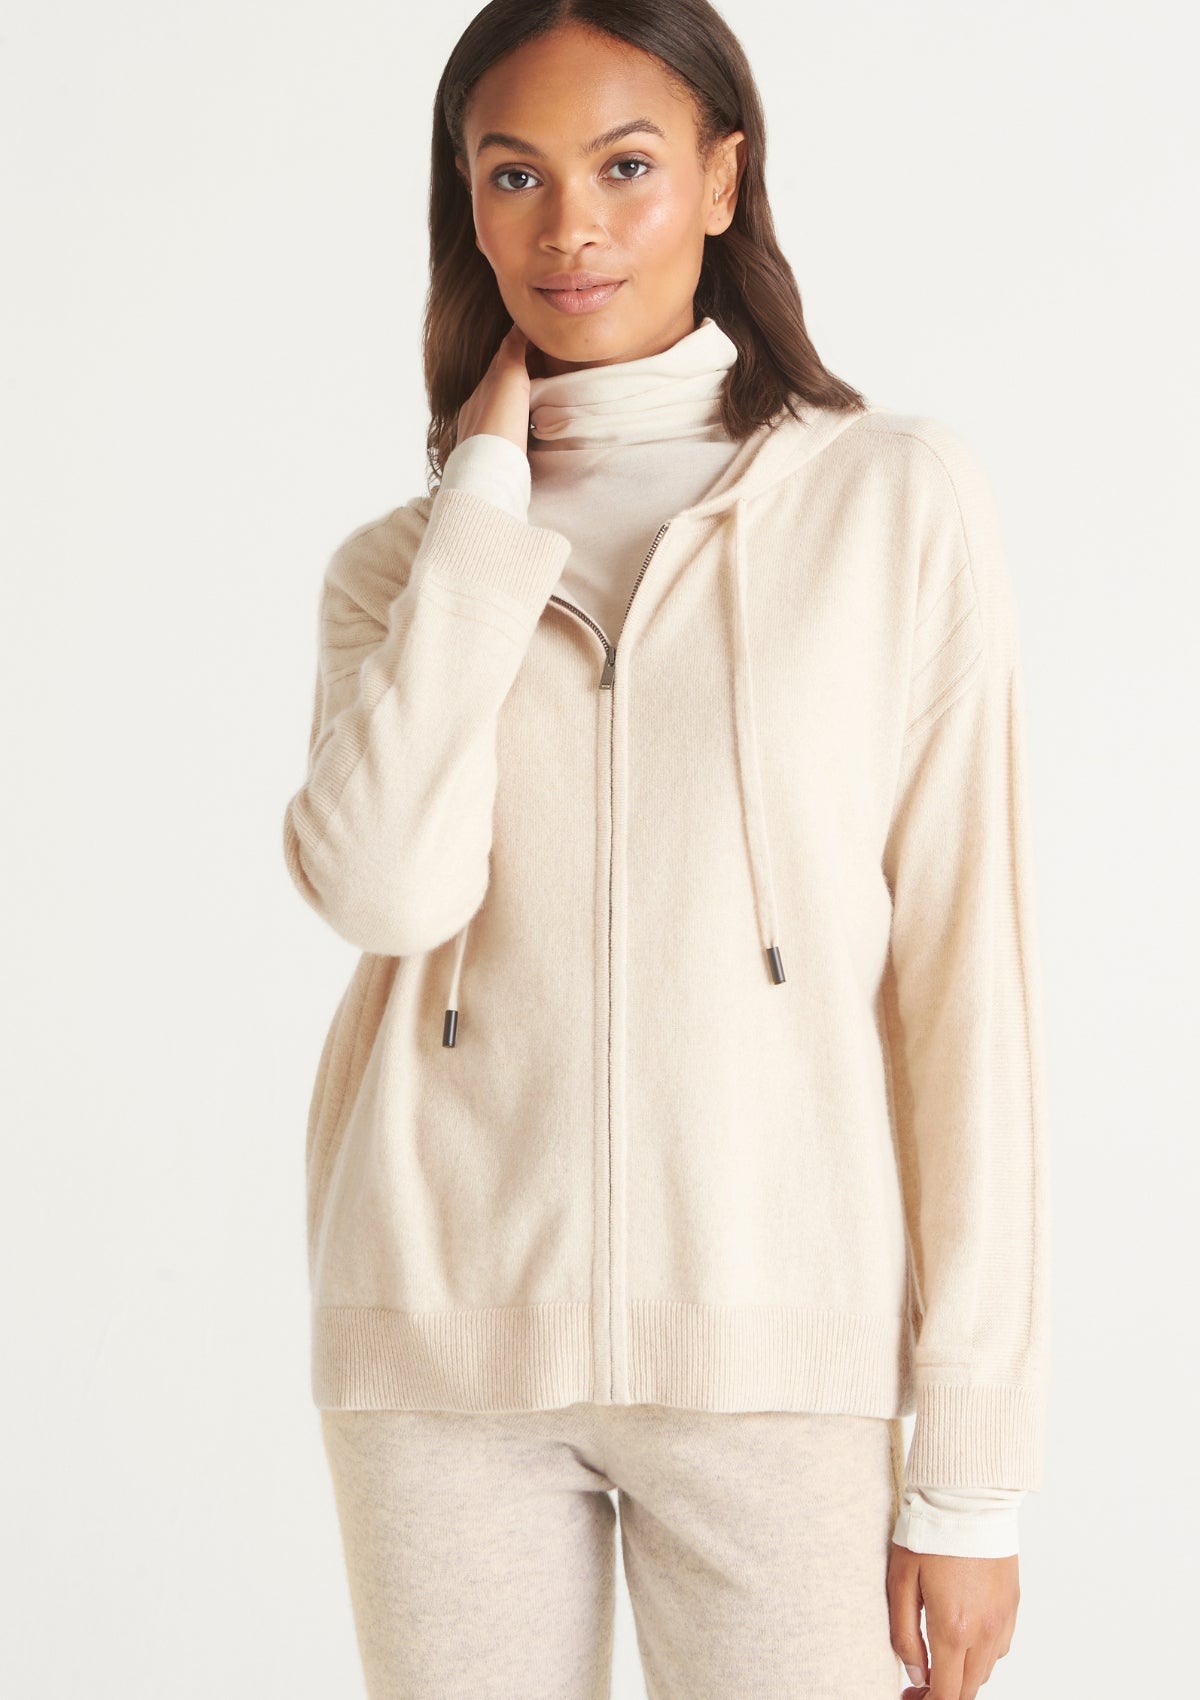 Cashmere Zip Through Hoodie in Natural White